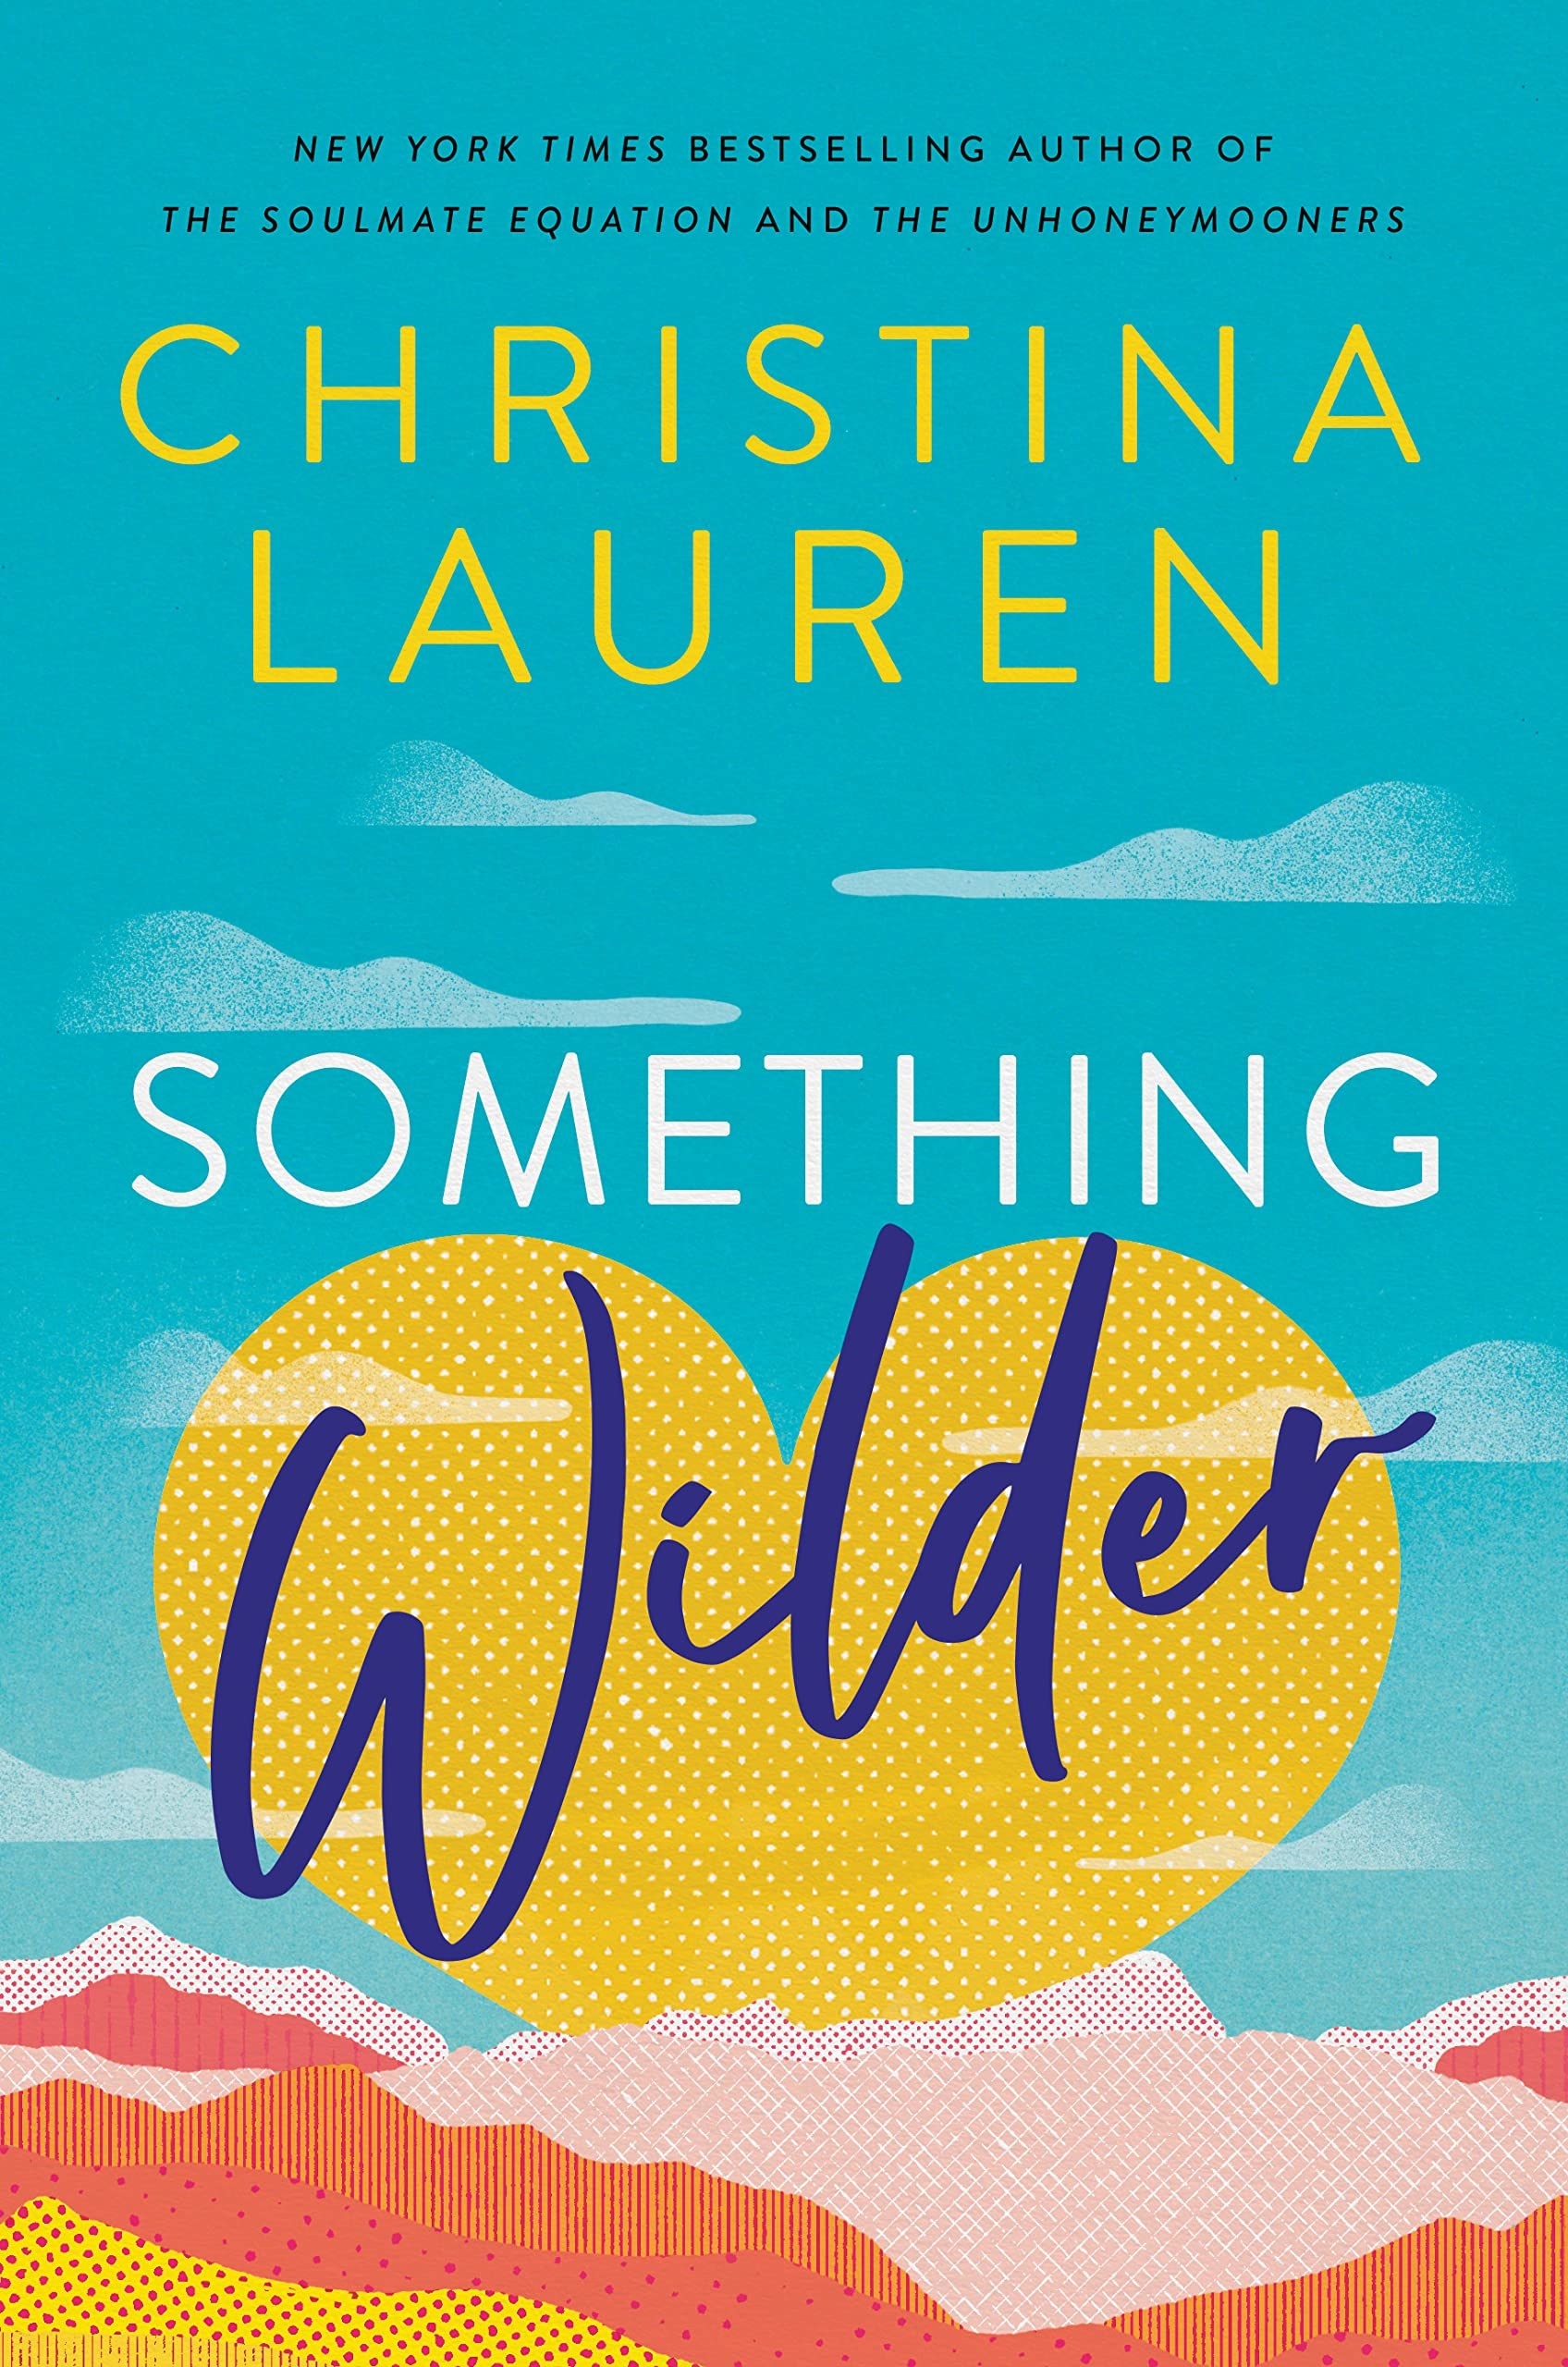 &quot;Something Wilder&#x27; cover illustrating a landscape with the sun in the shape of a heart